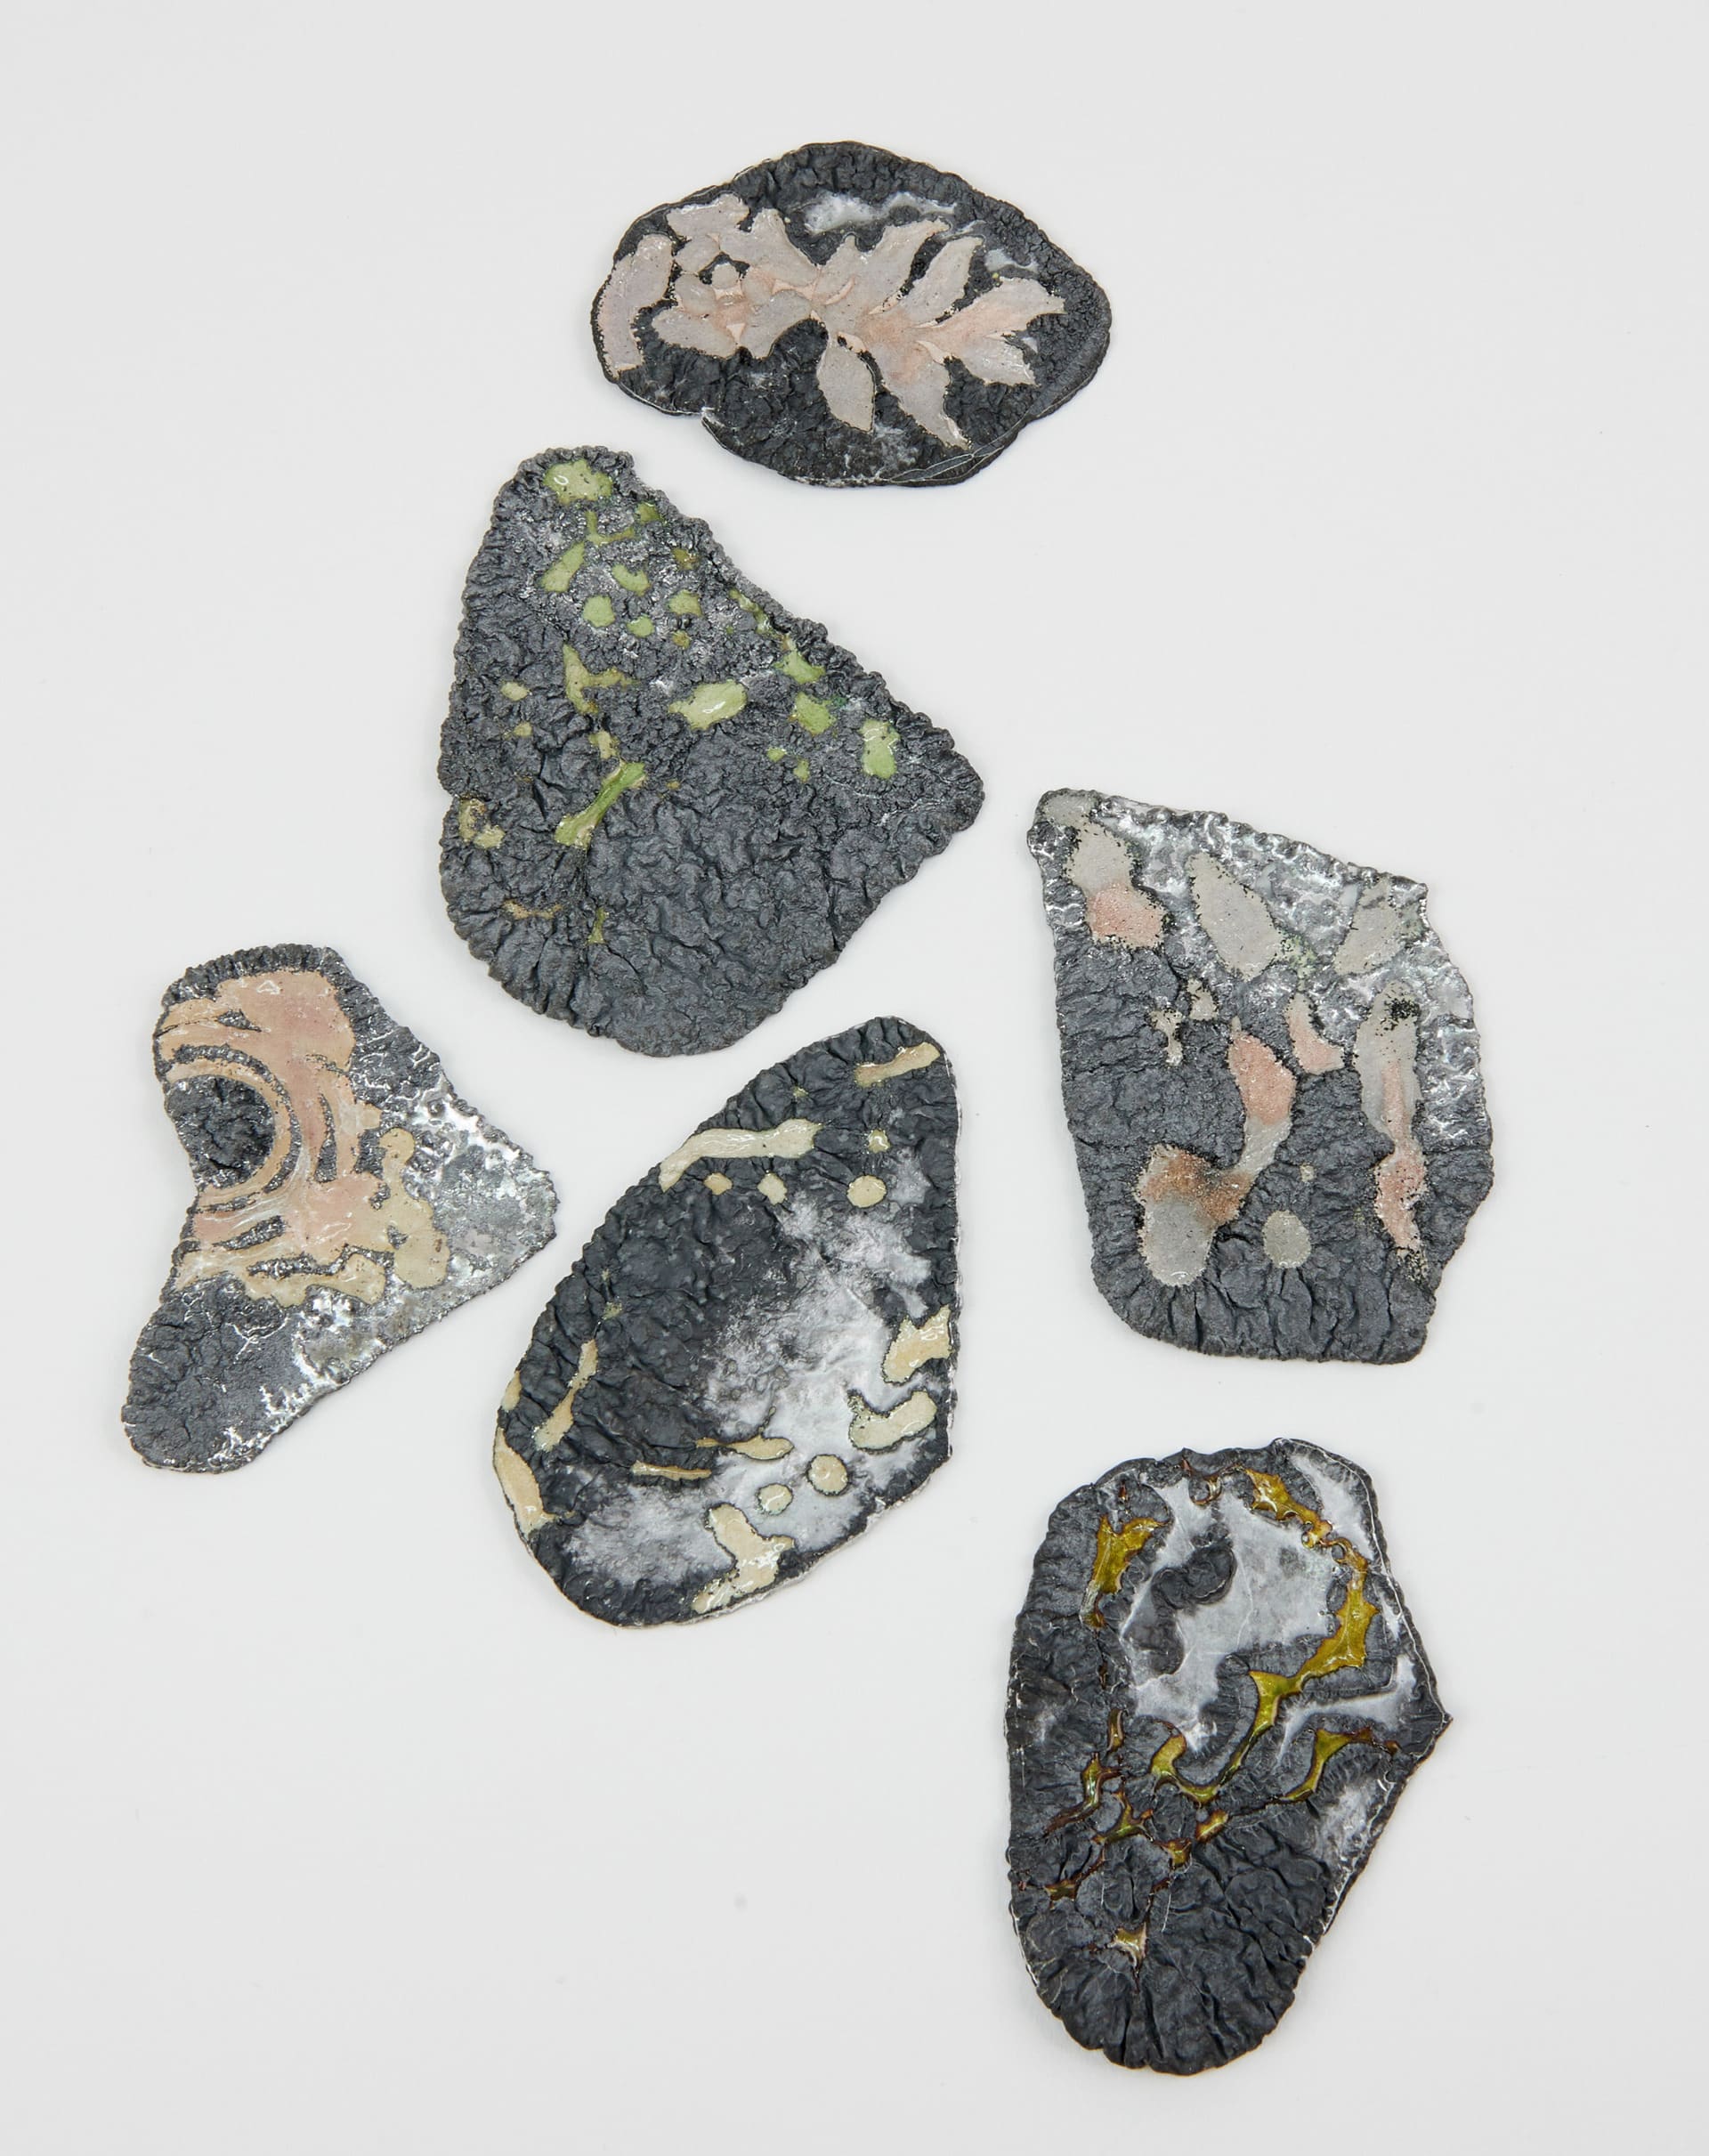 group of 6 silver fragments with coloured glass enamel across the surface